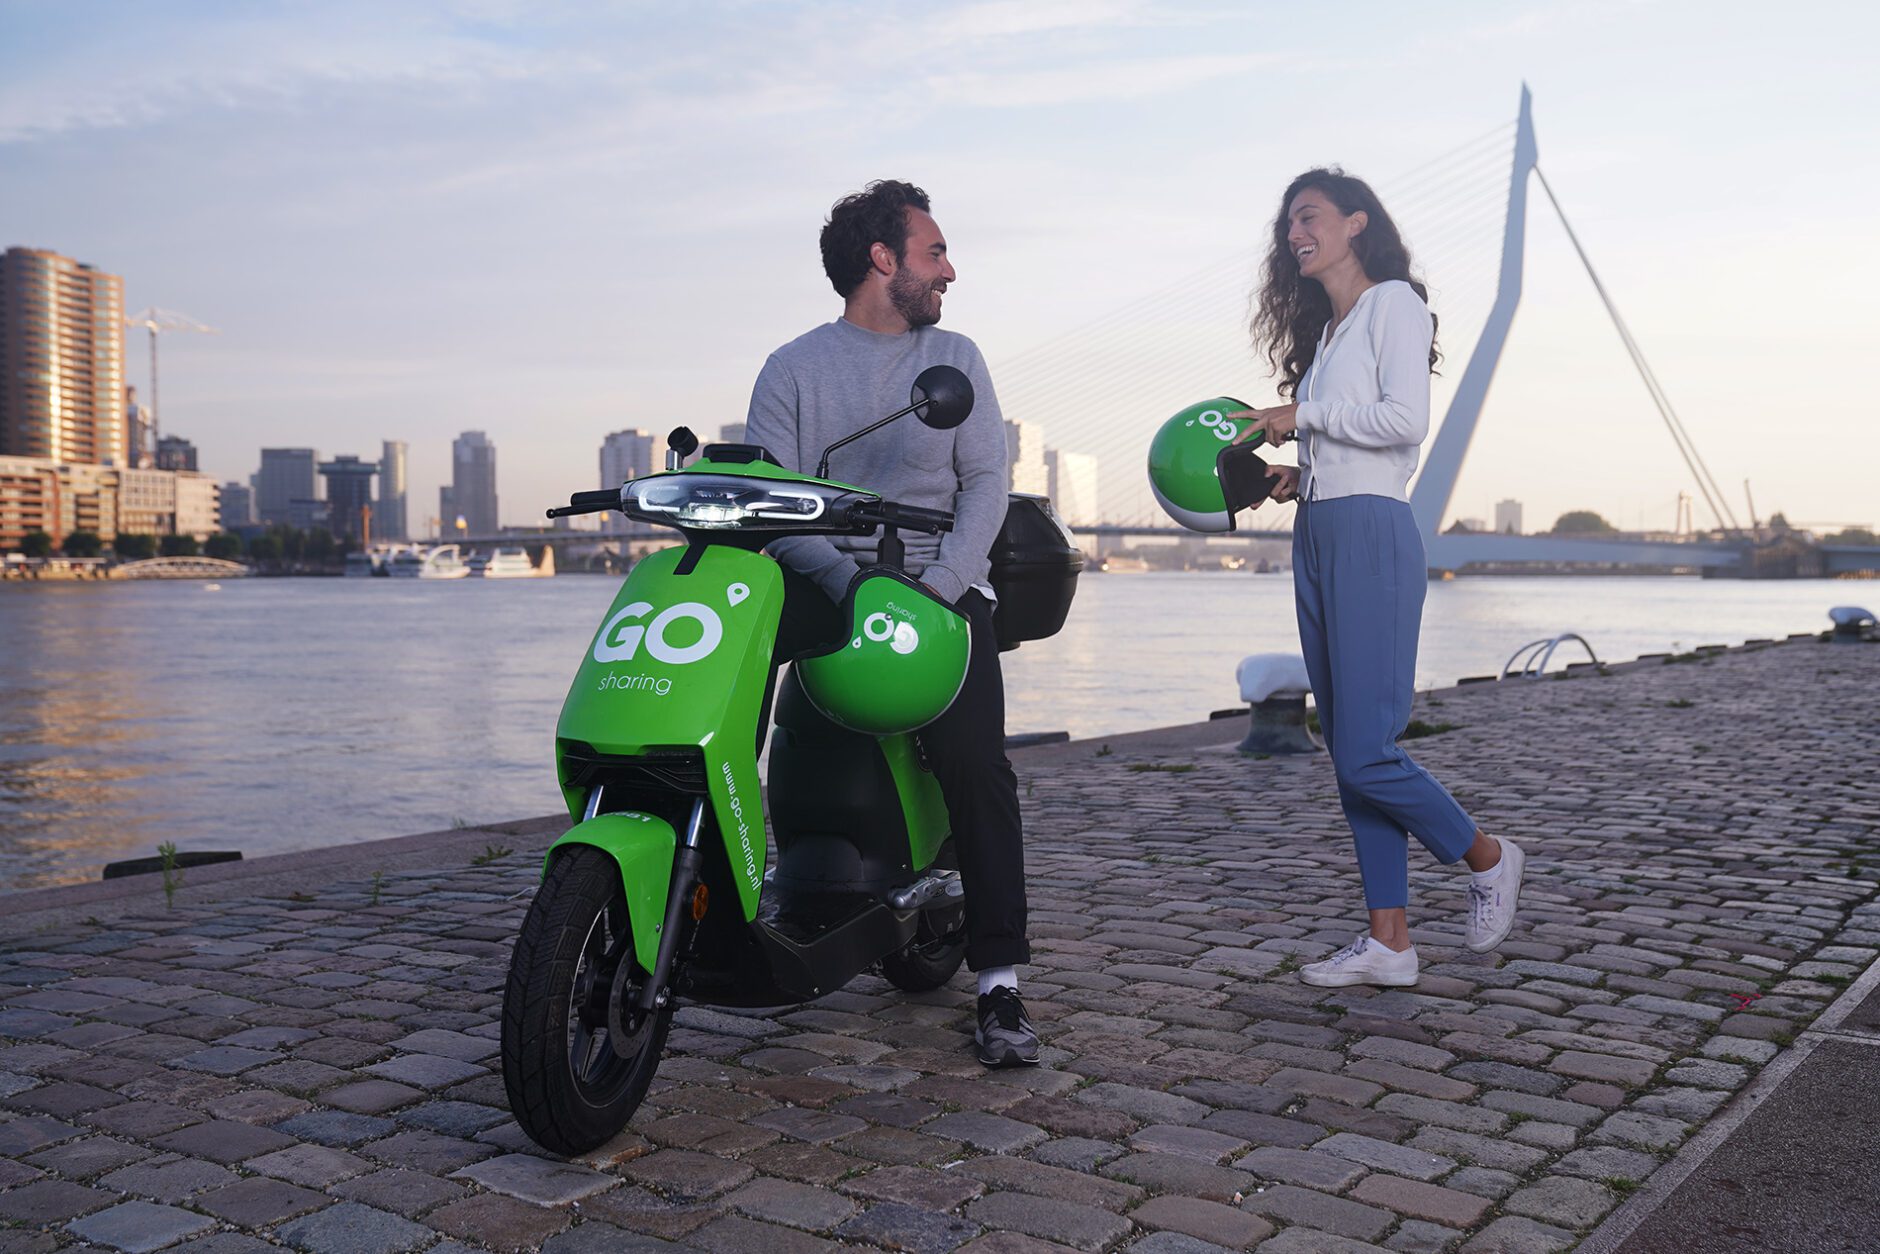 GO Sharing launches 500 e-scooters in Brussels